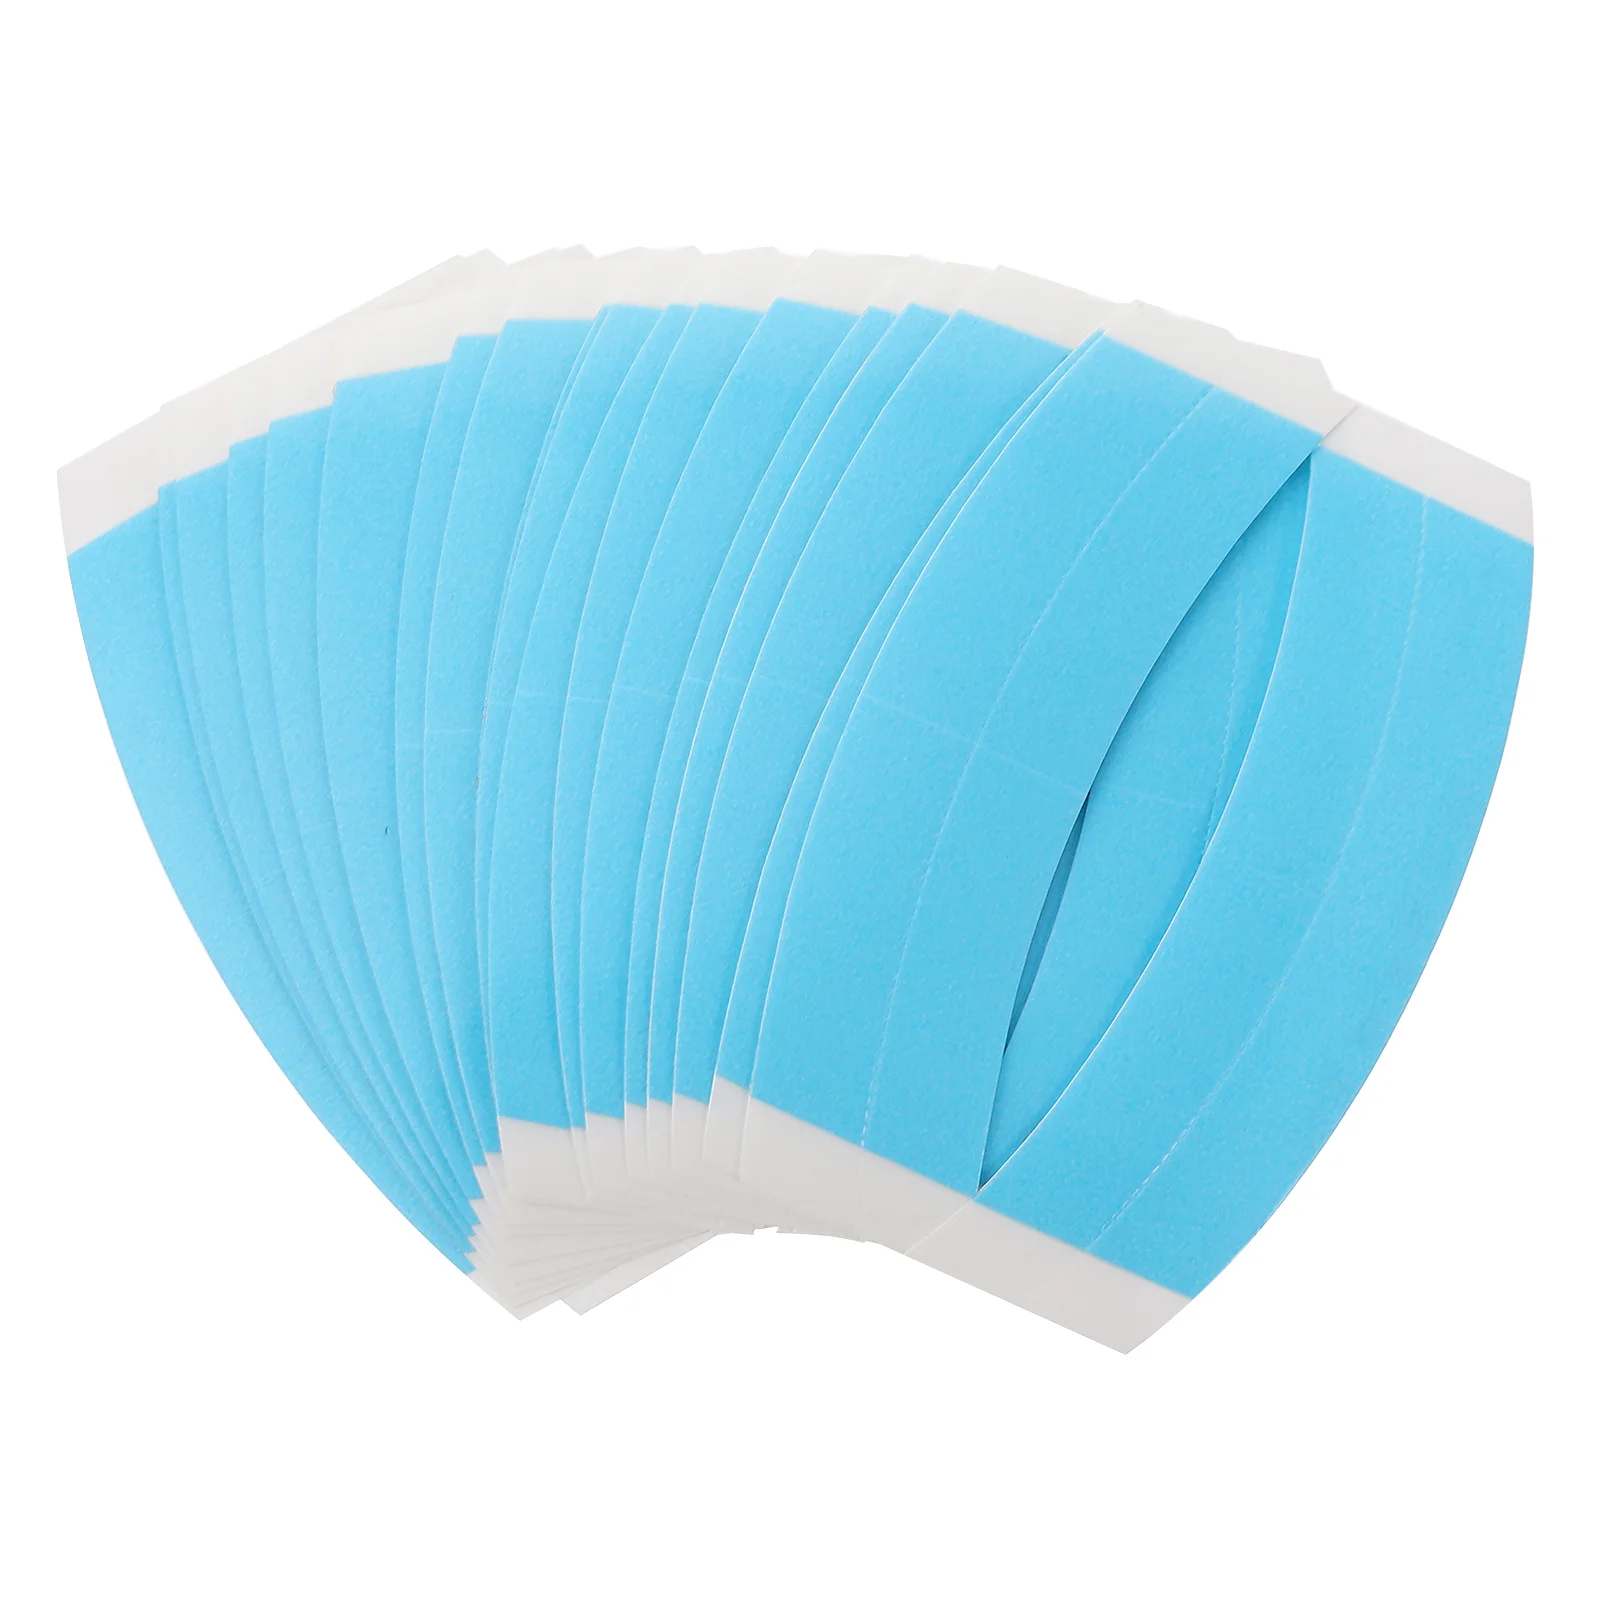 

Tape Hair Extension Lace Toupee Sticker Glue Sided Adhesive Strips System Double Adhesives Accessories Tabs Holder Piece